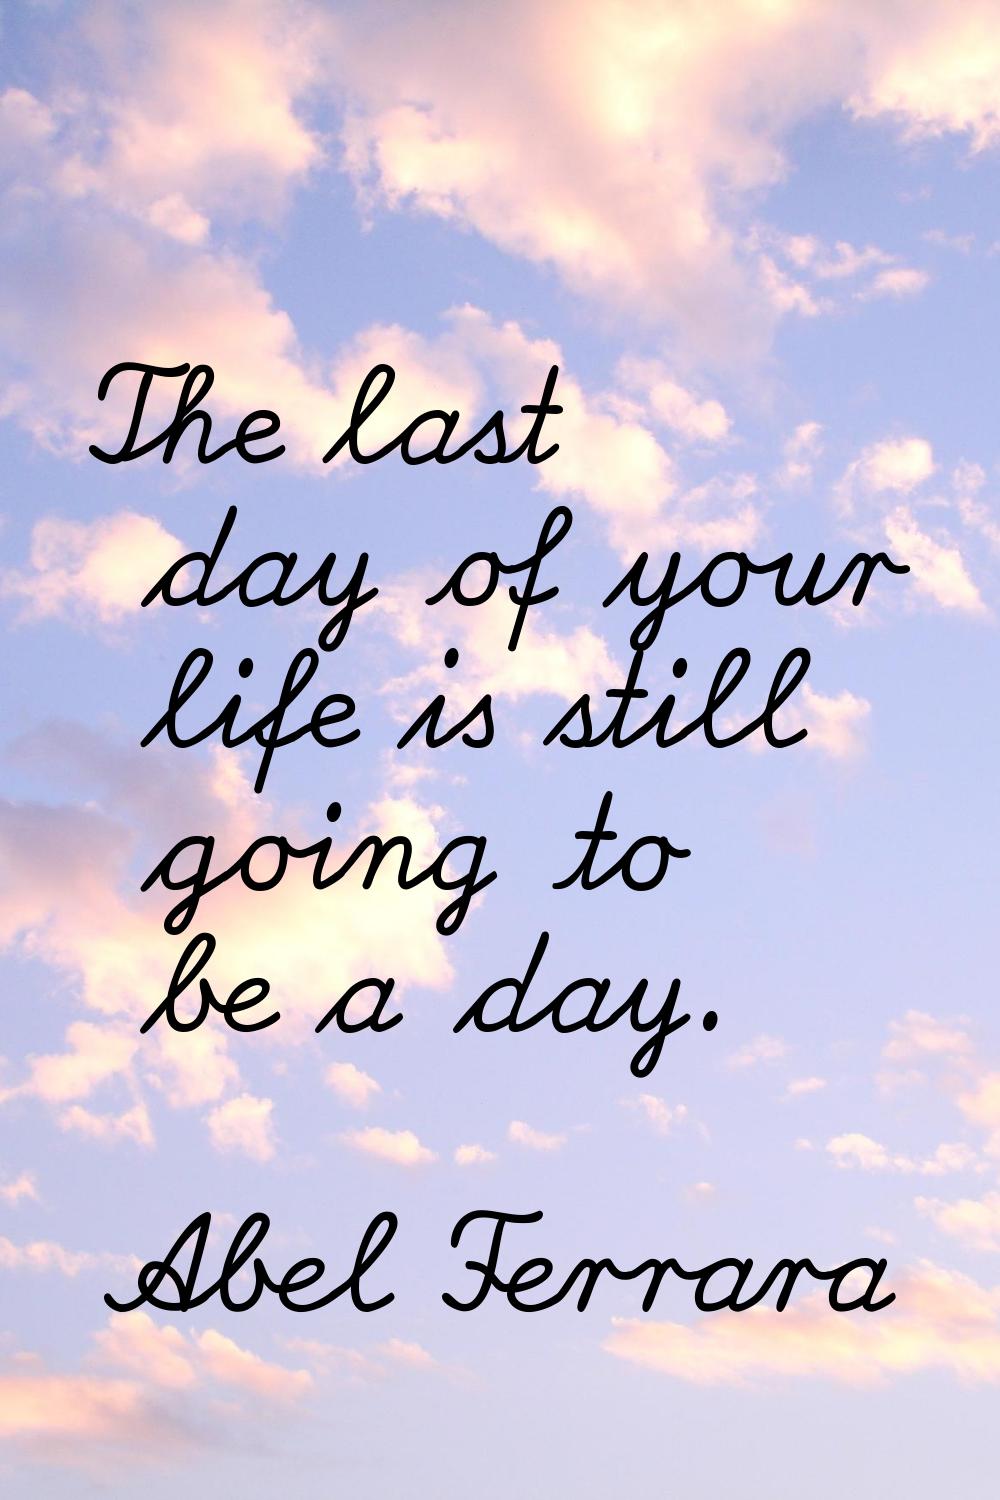 The last day of your life is still going to be a day.